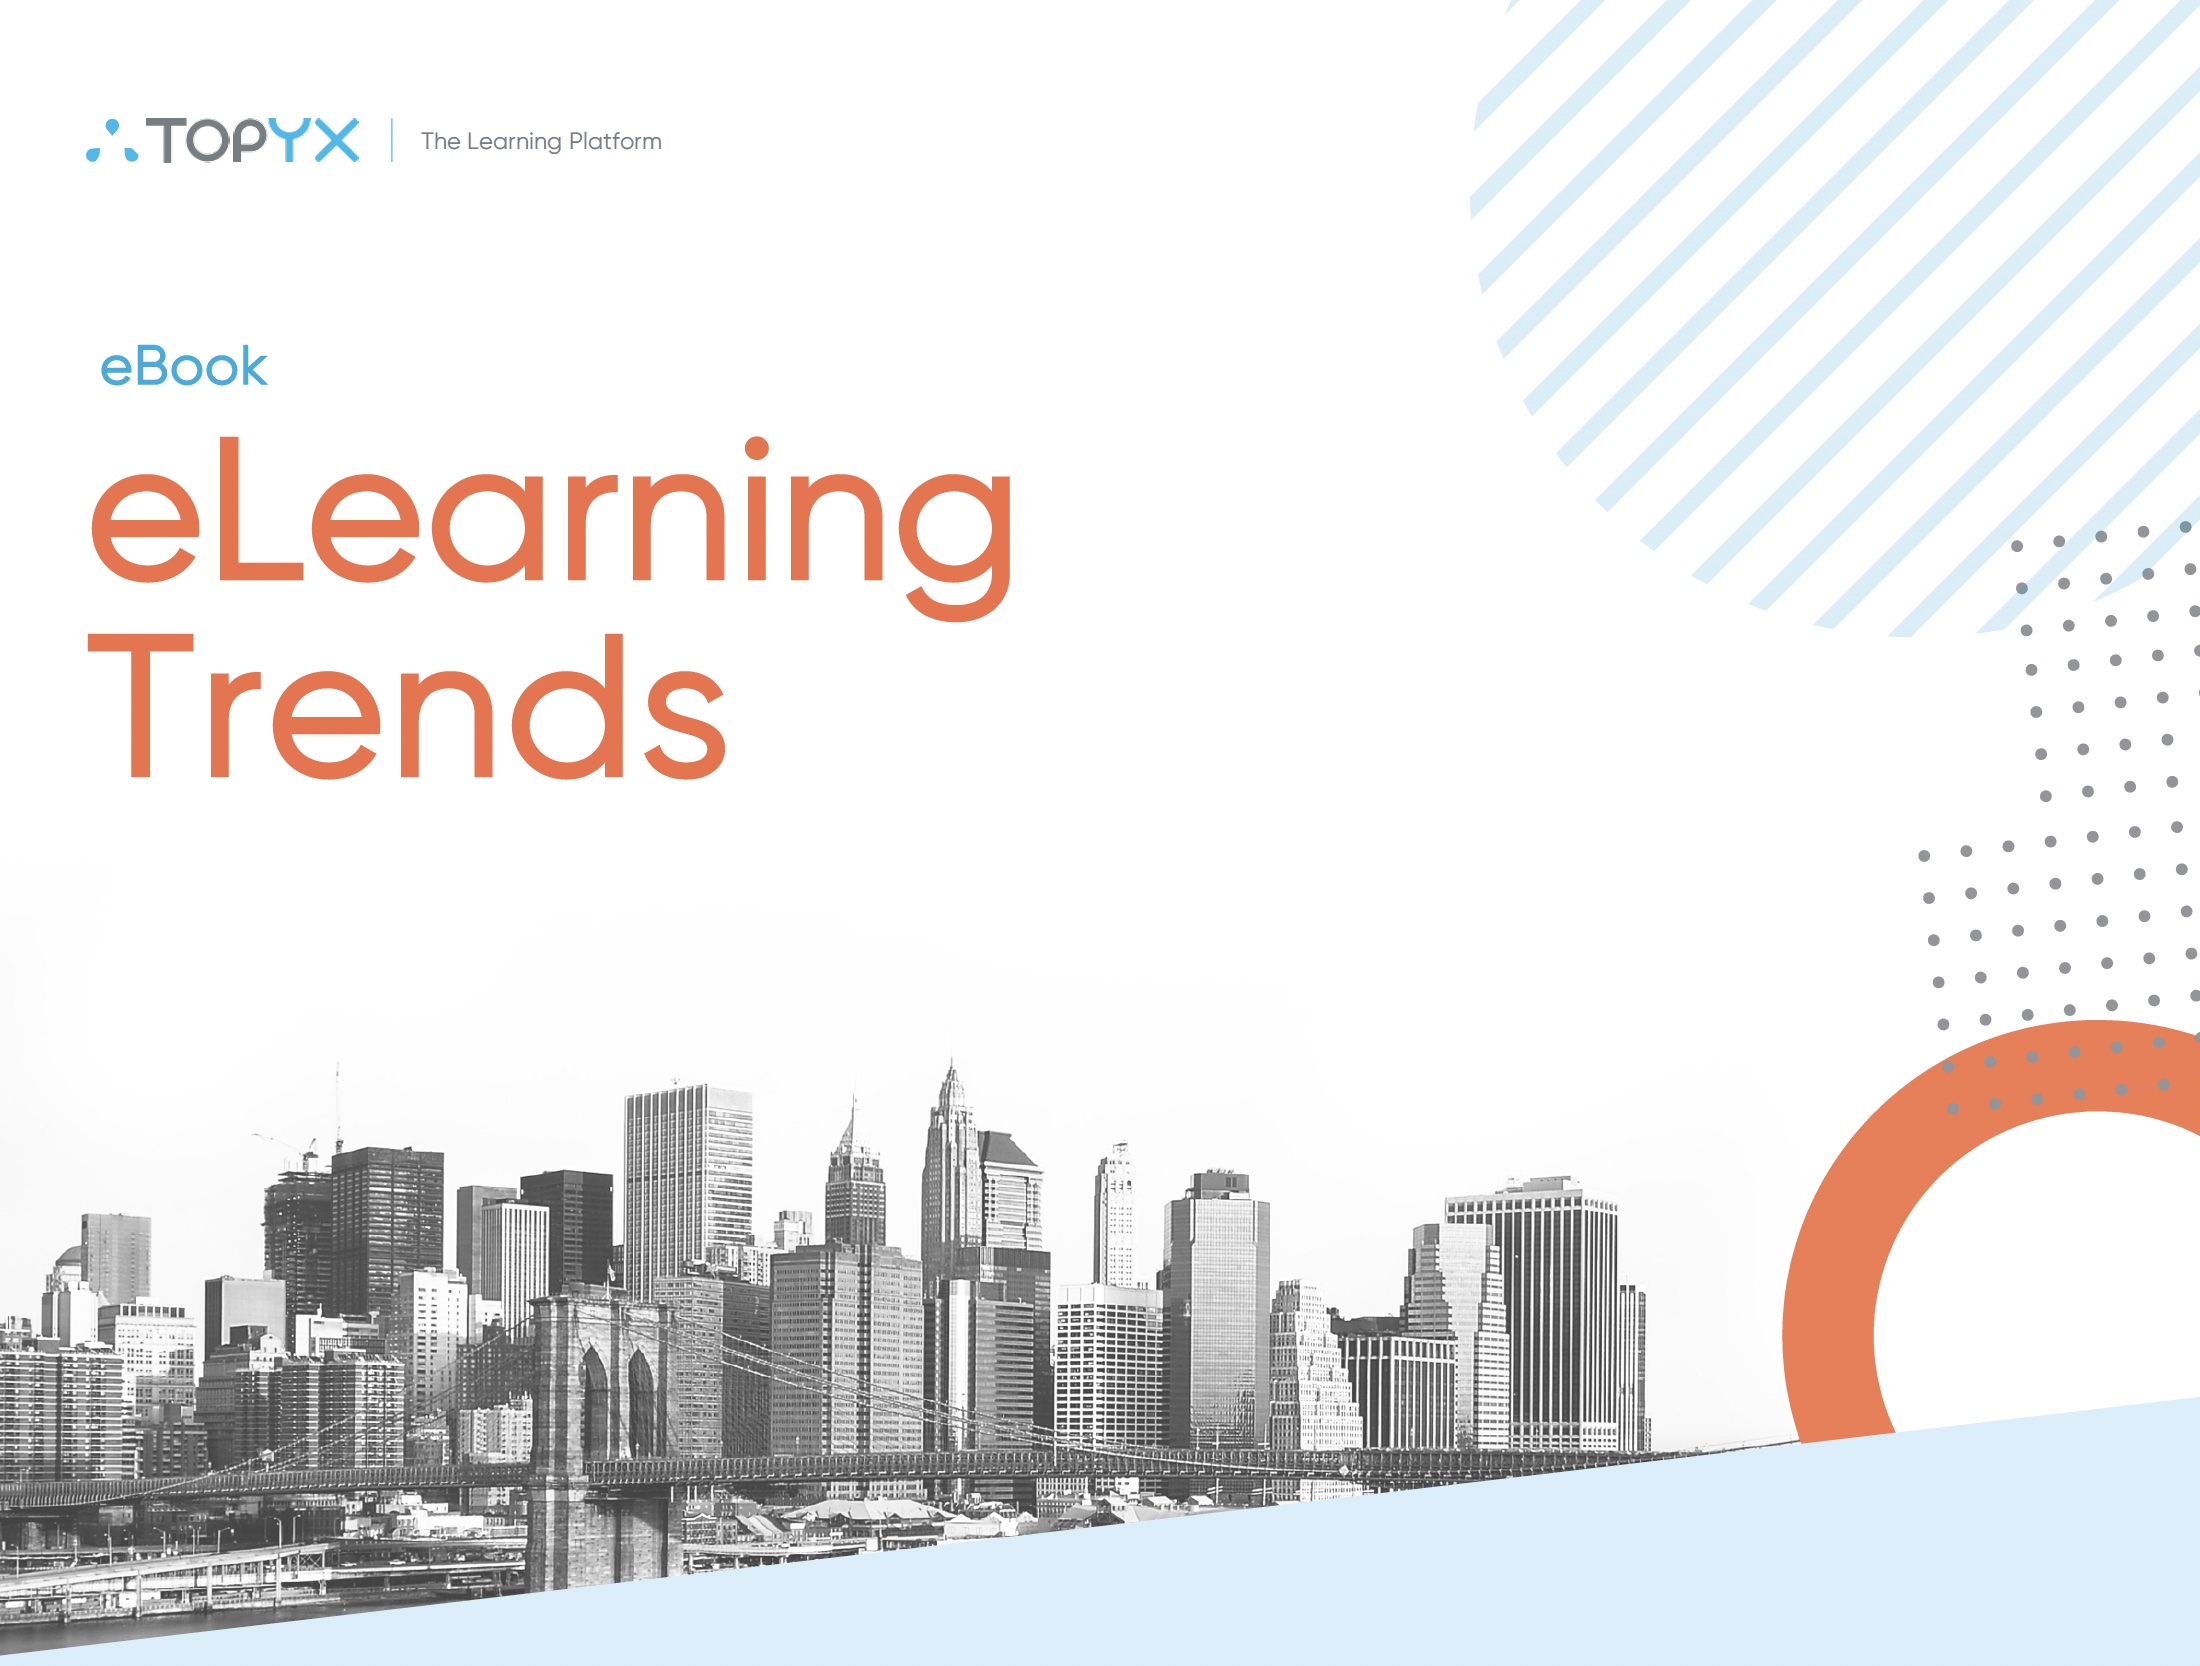 eLearning Trends for 2021